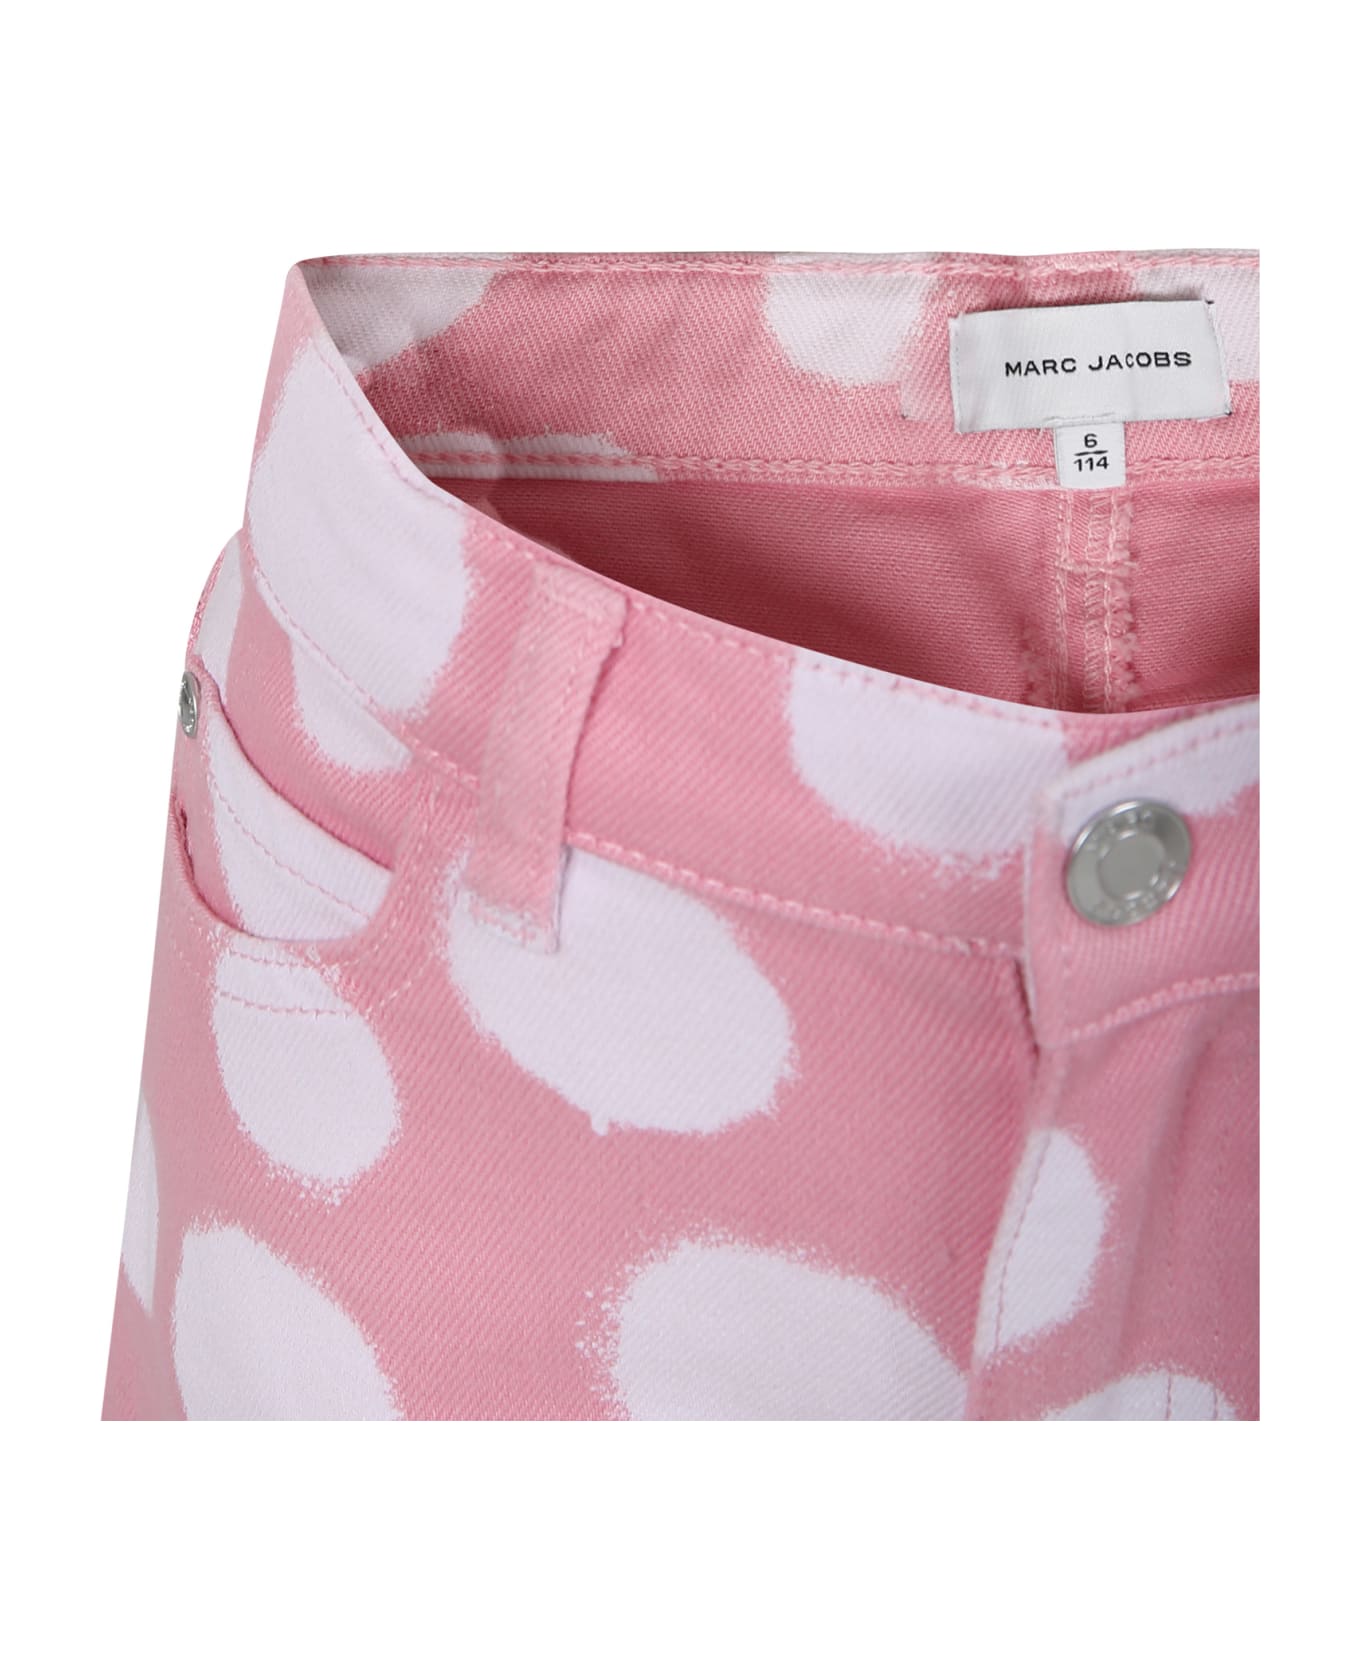 Marc Jacobs Pink Shorts For Girl With All-over Polka Dots - Rosa